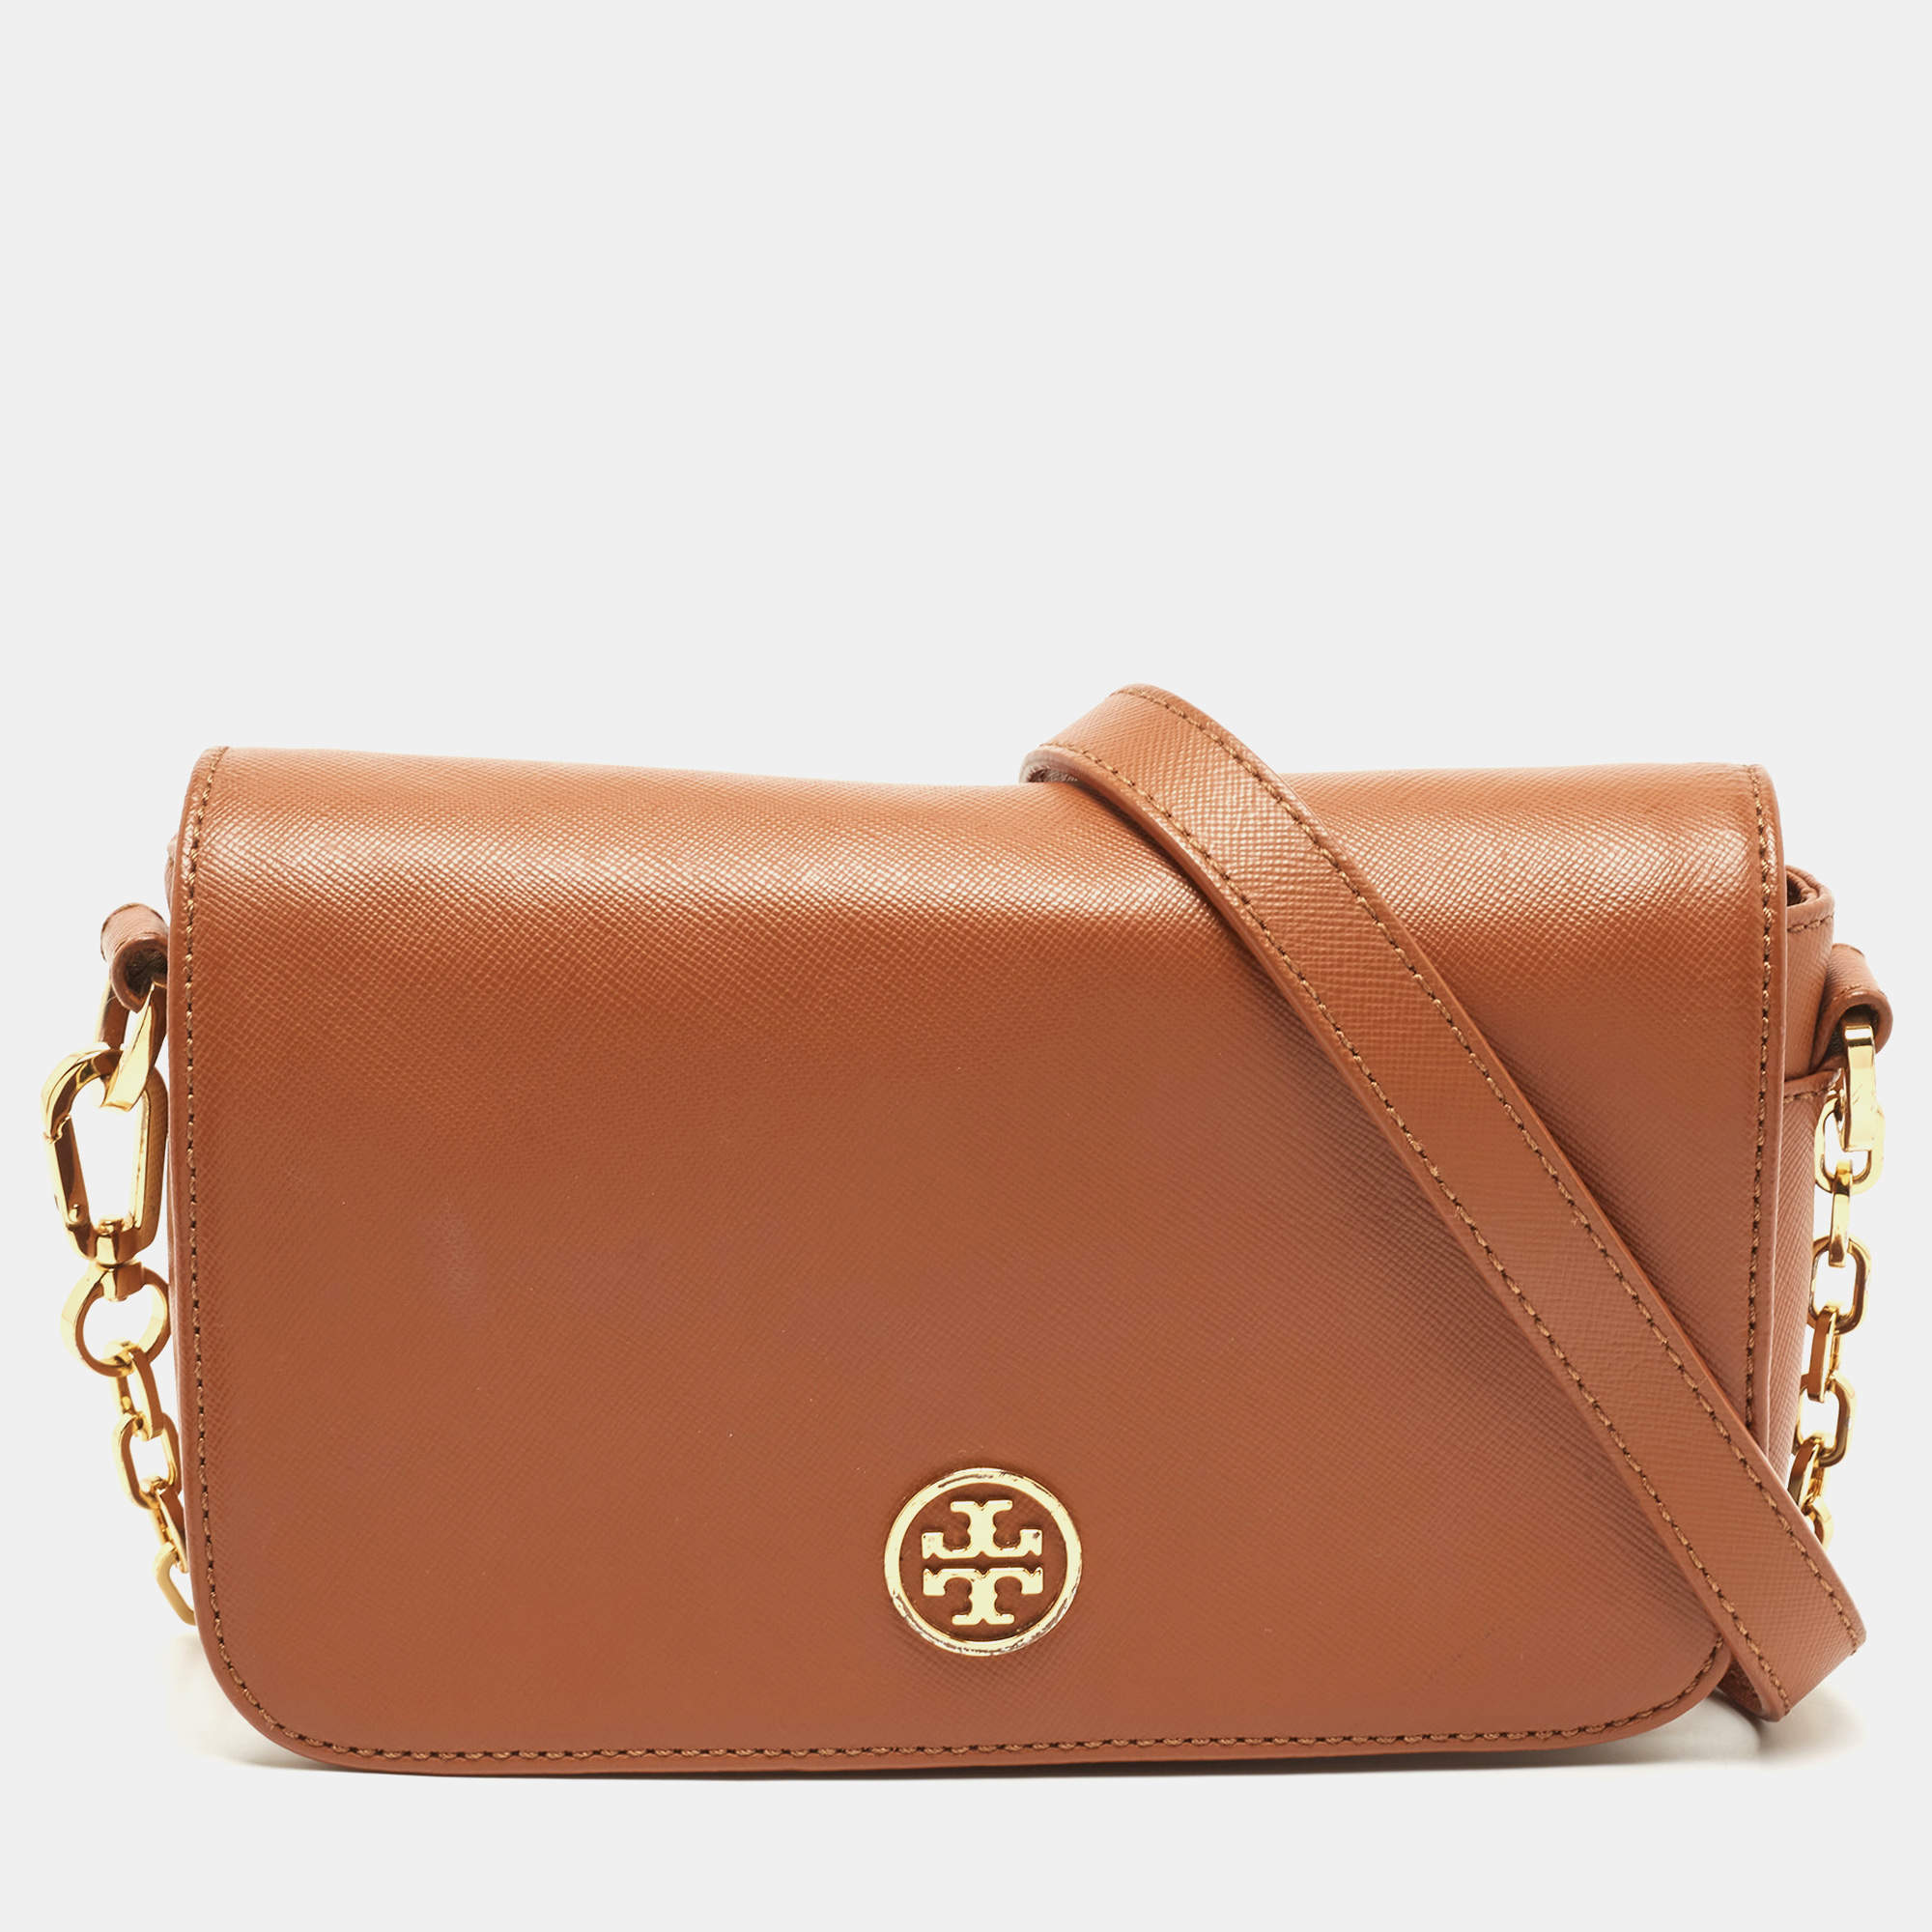 AUTH Tory Burch Robinson Small Pebbled Leather Tote Bag